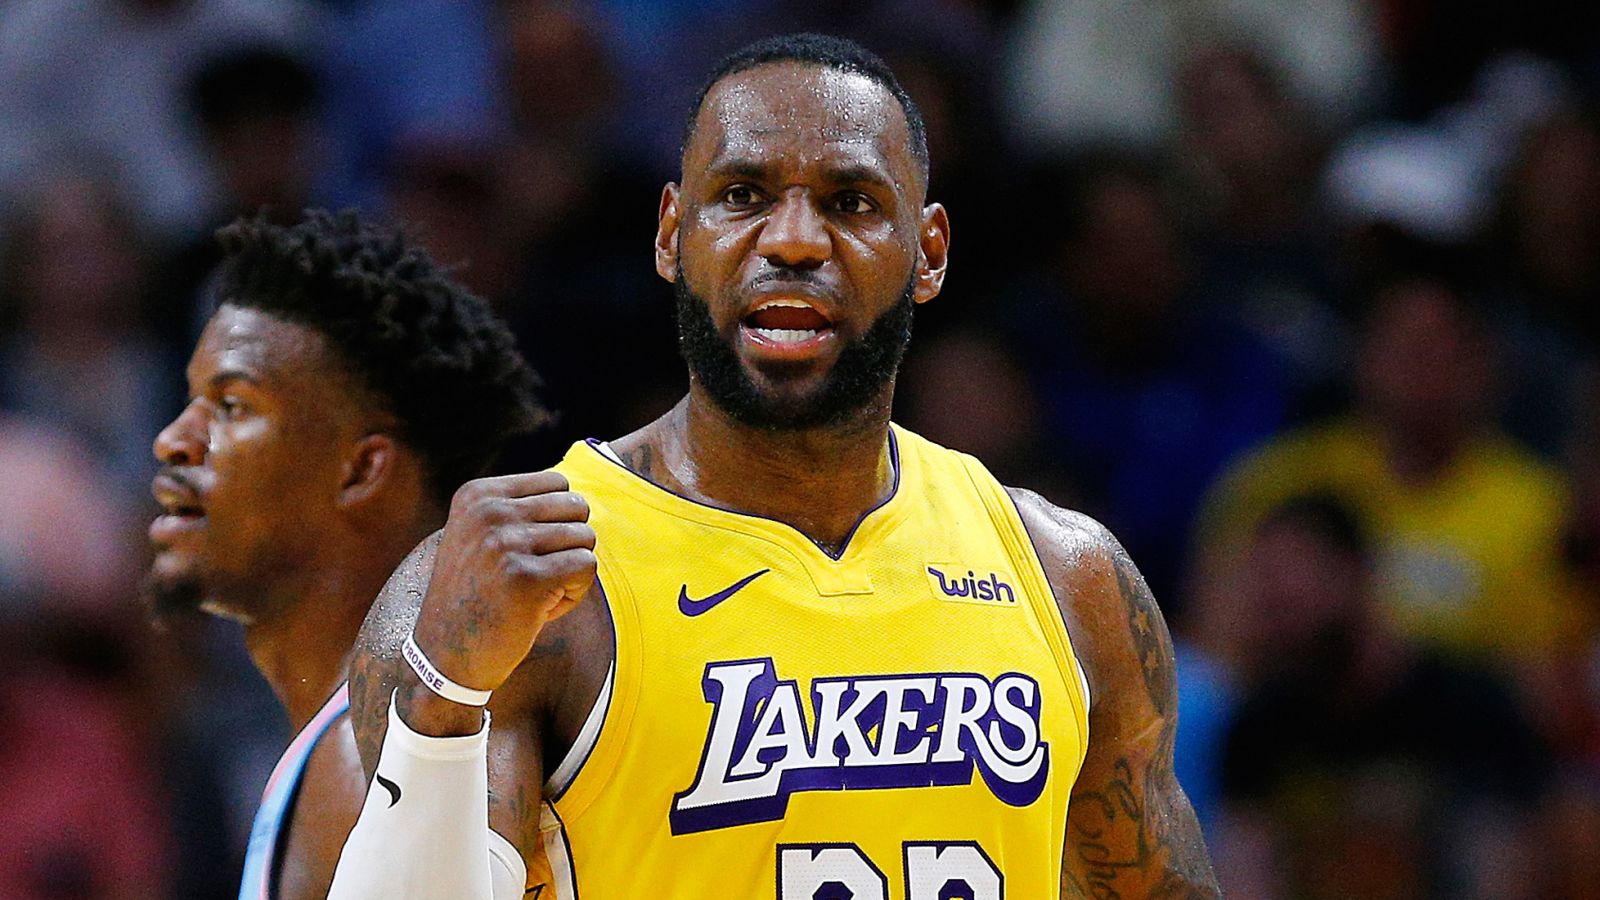 LeBron James reacts to comparison between him and Spurs dynasty